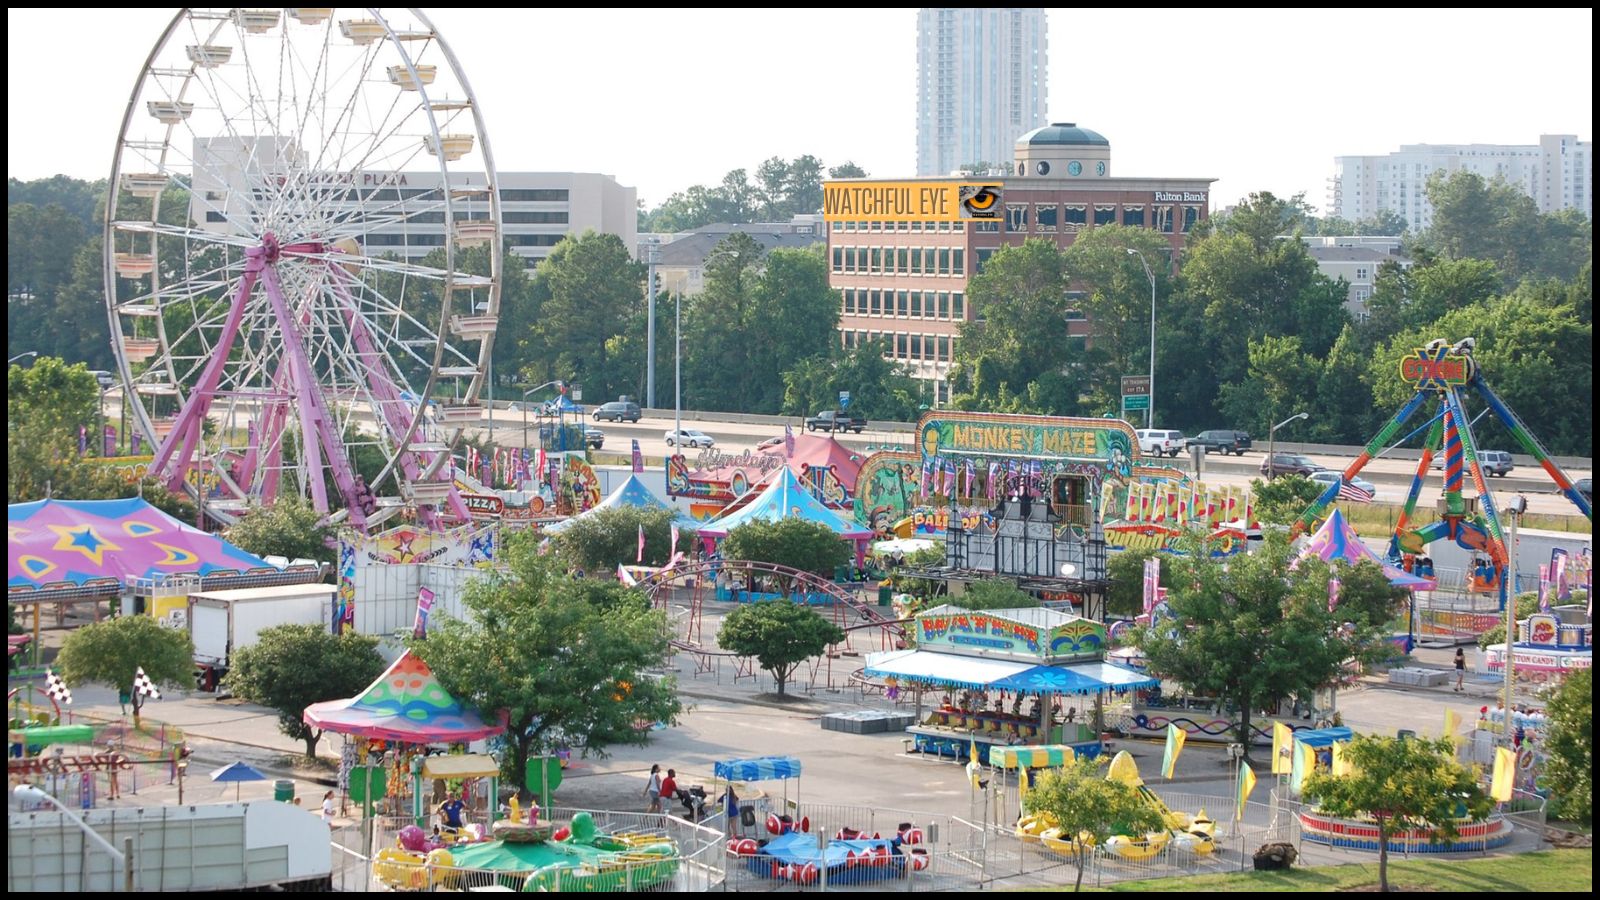 Teen killed, another injured at Mount Trashmore Carnival in Virginia Beach